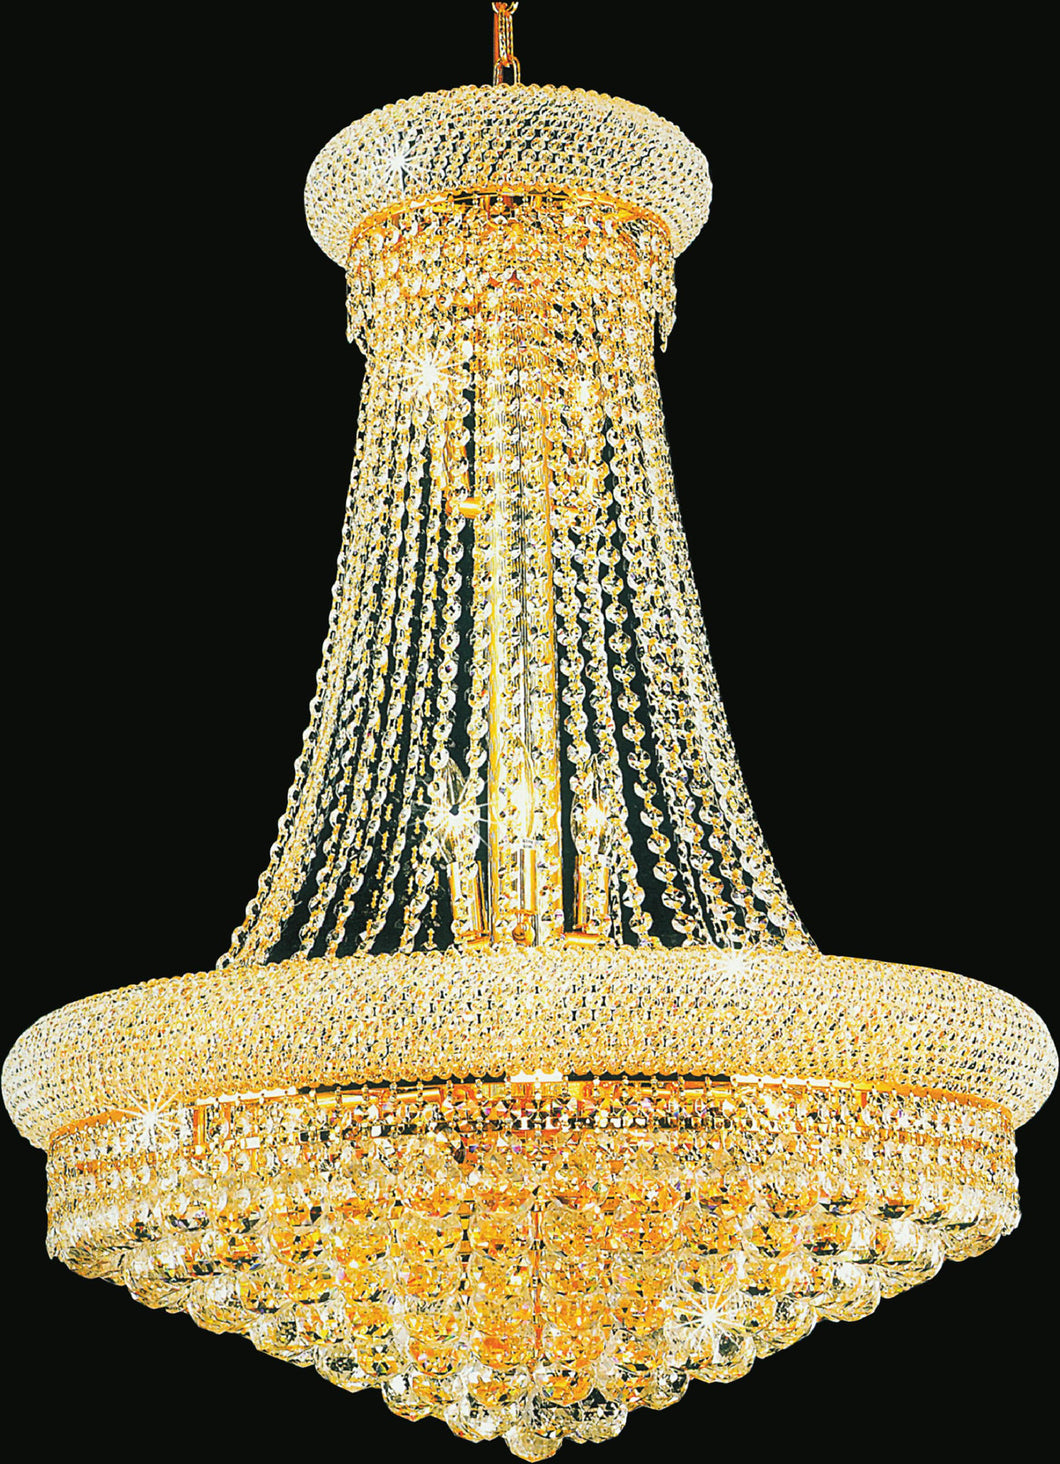 19 Light Down Chandelier with Gold finish